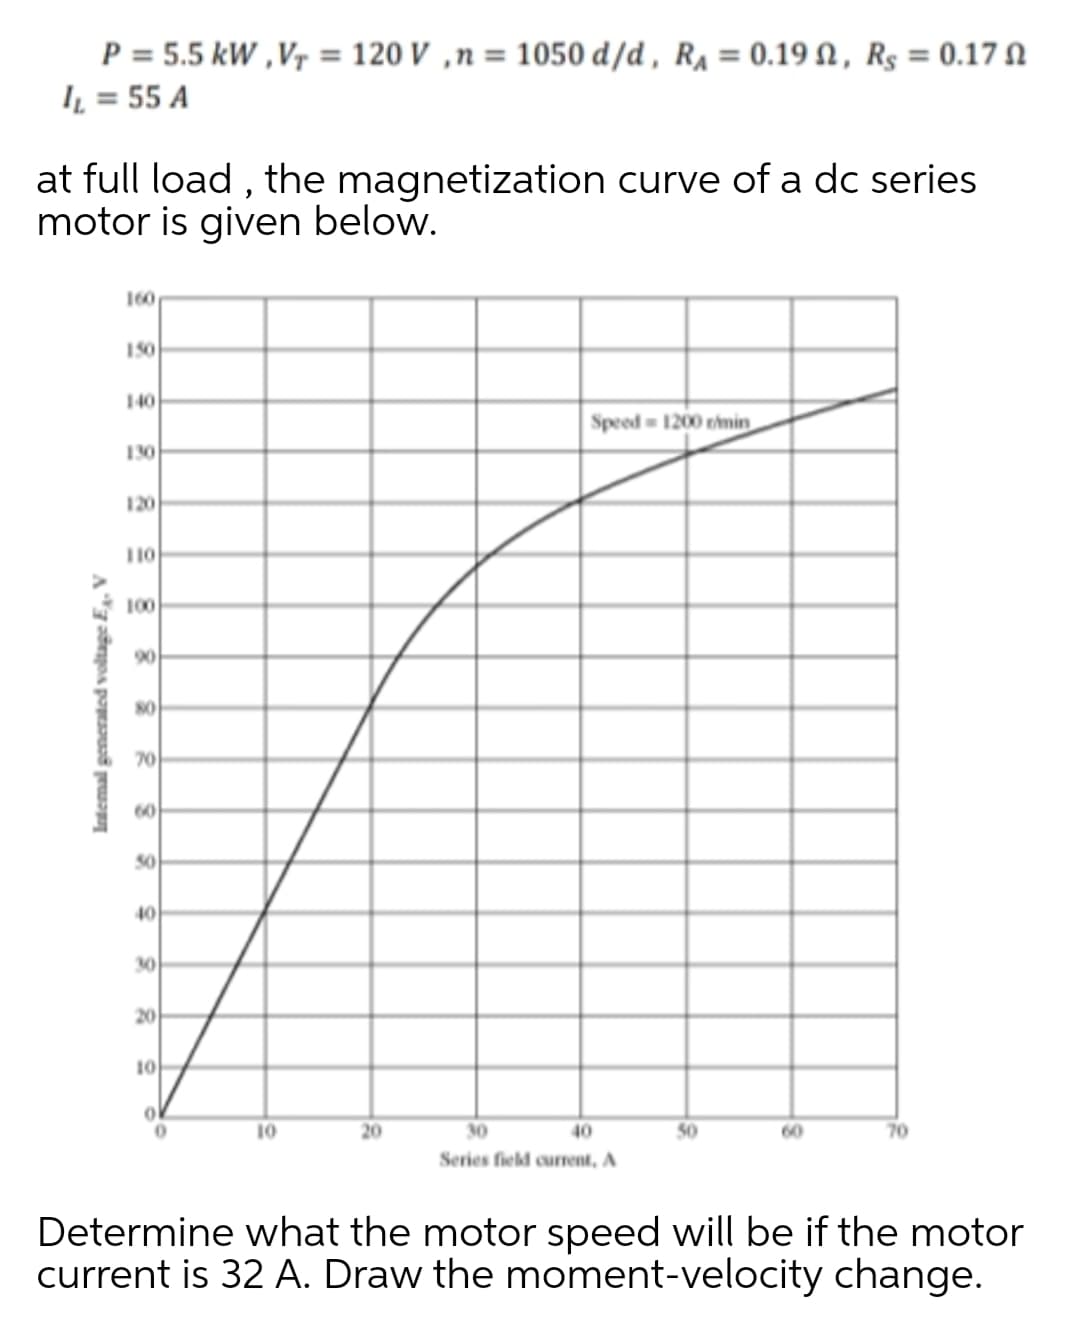 P = 5.5 kW ,Vr = 120 V ,n = 1050 d/d, Rë = 0.19 N, Rs = 0.17 N
IL = 55 A
n 3D
at full load , the magnetization curve of a dc series
motor is given below.
160
150
140
Speed 1200 tmin
130
120
110
100
90
80
70
60
50
40
30
20
10
10
20
30
40
50
60
70
Series field current, A
Determine what the motor speed will be if the motor
current is 32 A. Draw the moment-velocity change.
Intemal generated voltage E, V
